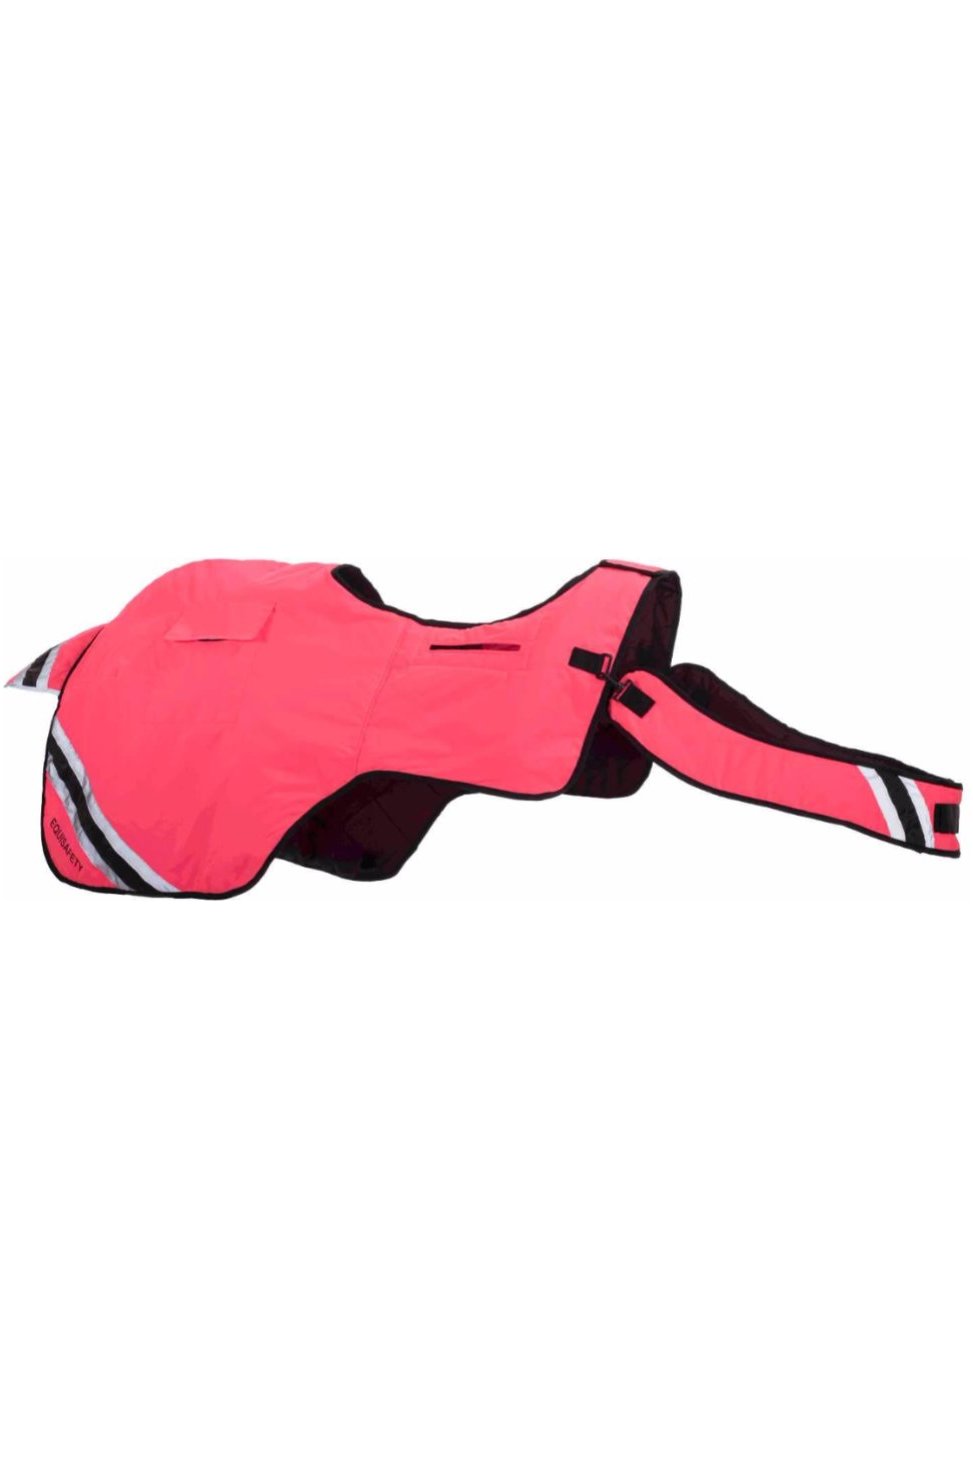 2023 Equisafety Hi-Vis Waterproof Wrap Around Exercise Rug WRUG - Pink -  Horse - | The Drillshed